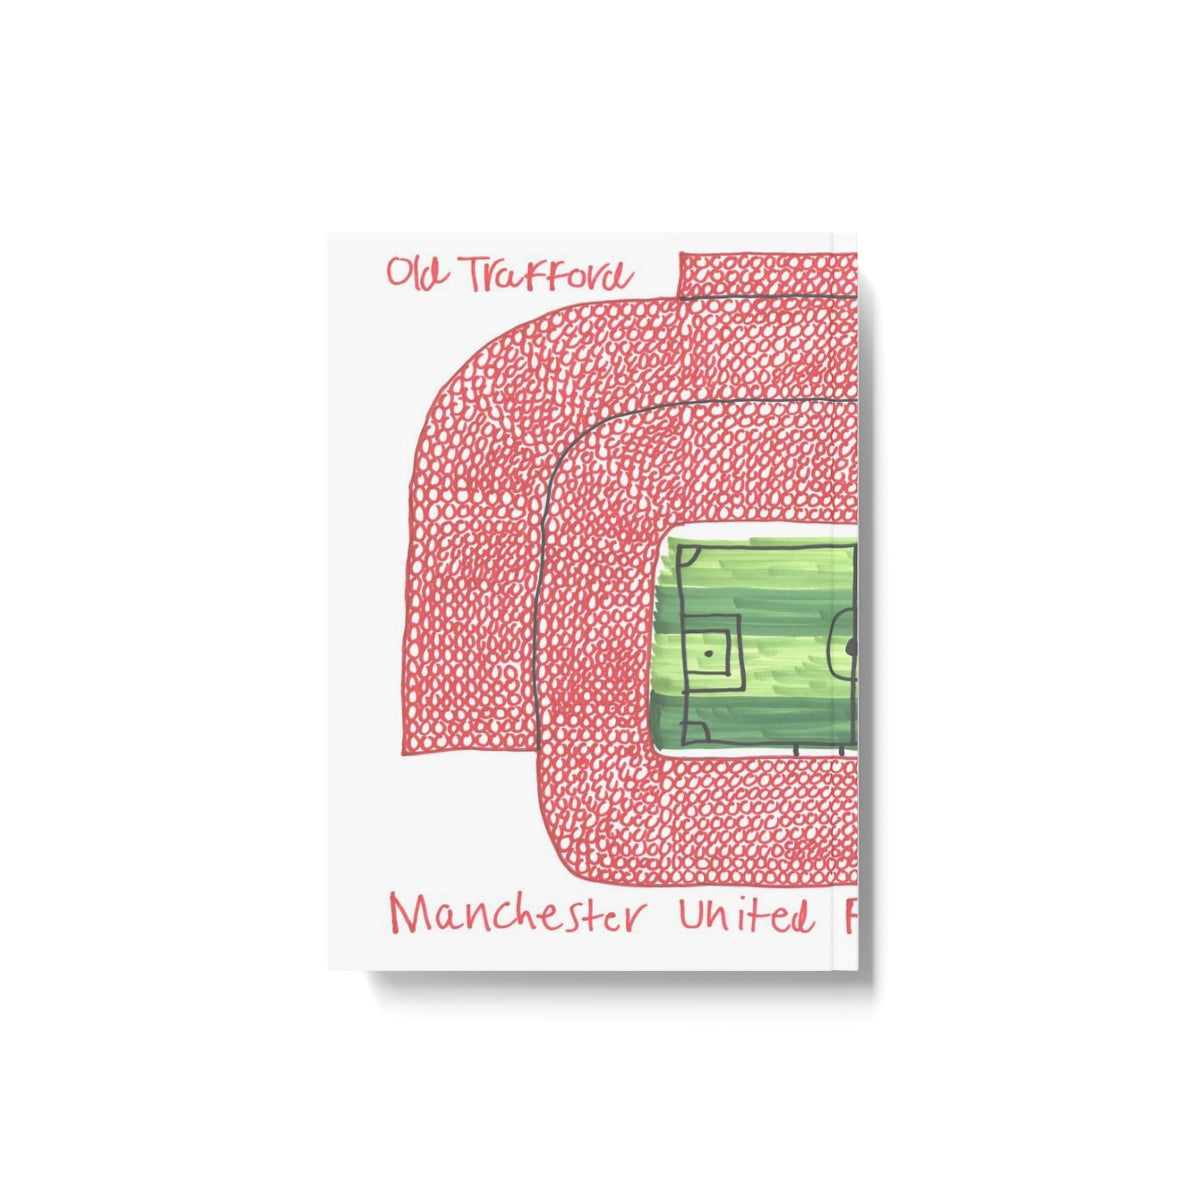 Manchester United - Old Trafford - Hard Backed Journal